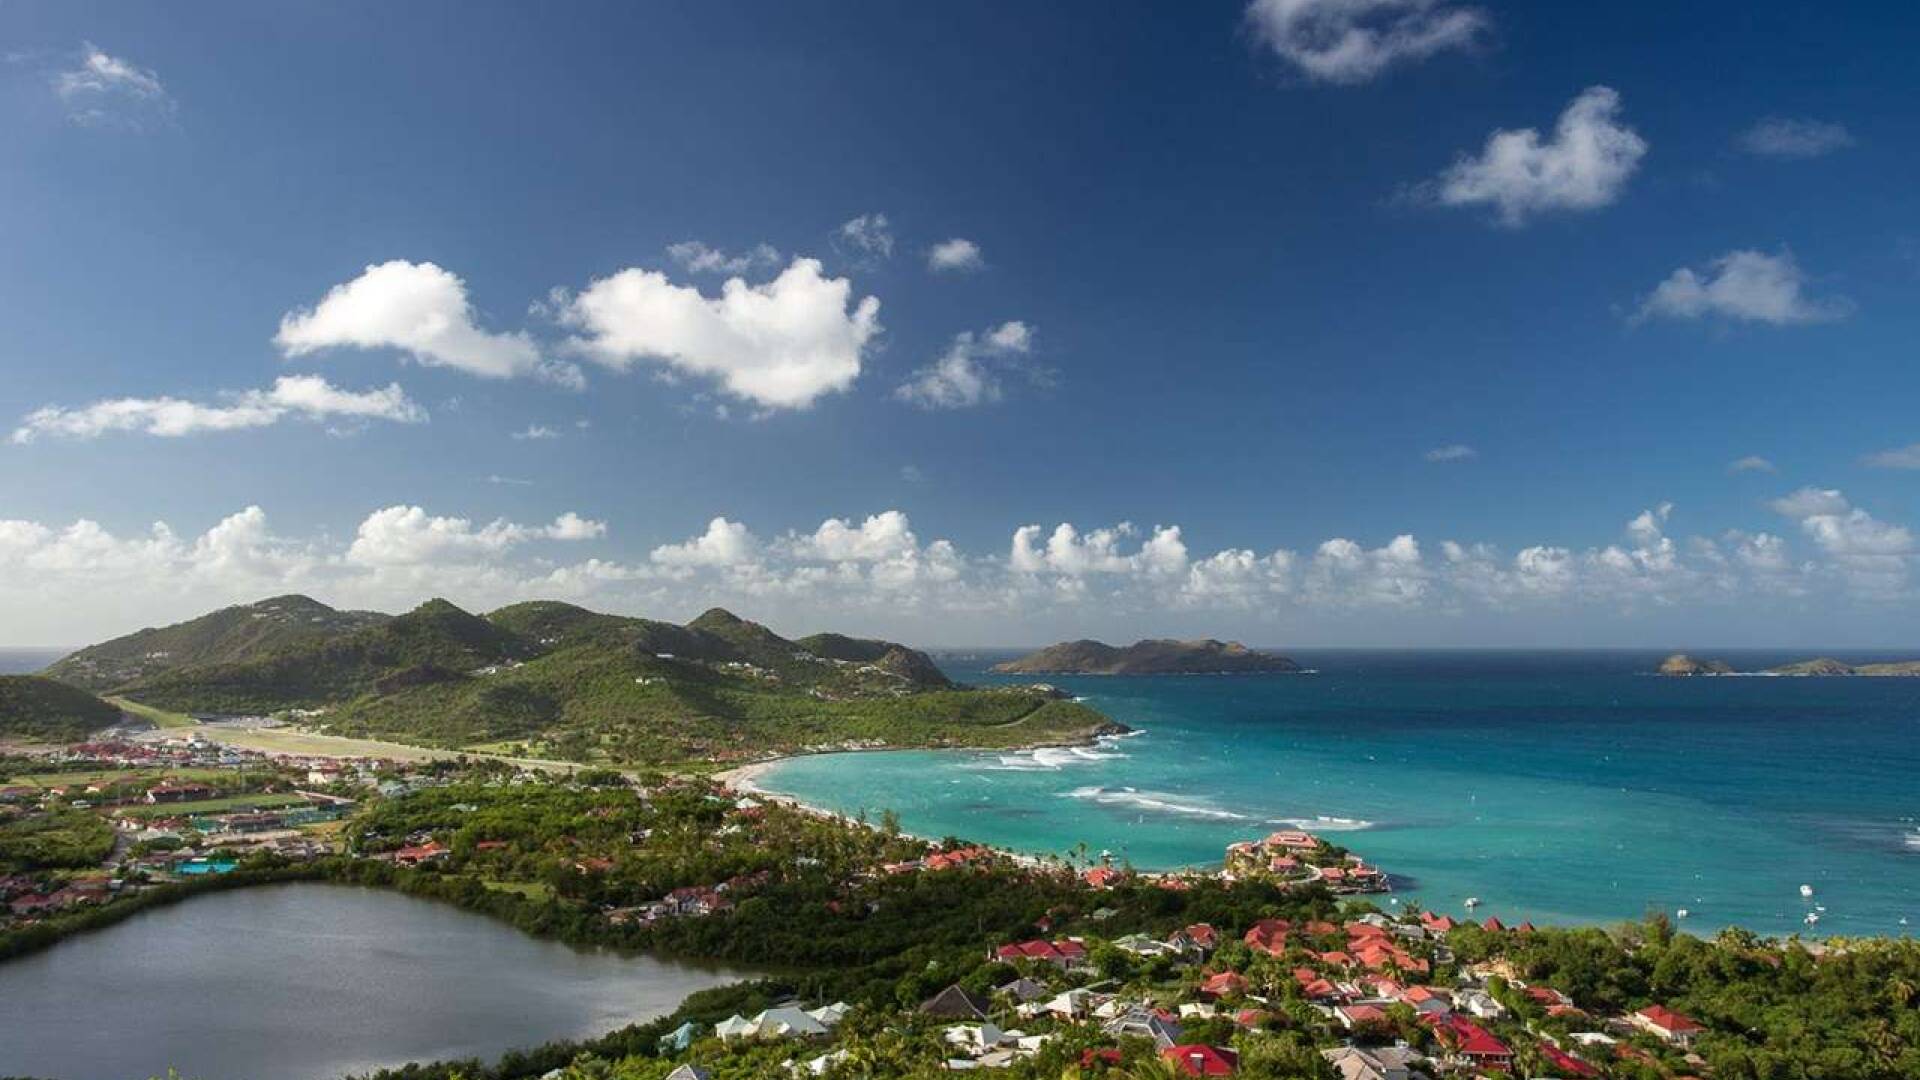 The view from WV IEW, St. Jean, St. Barthelemy